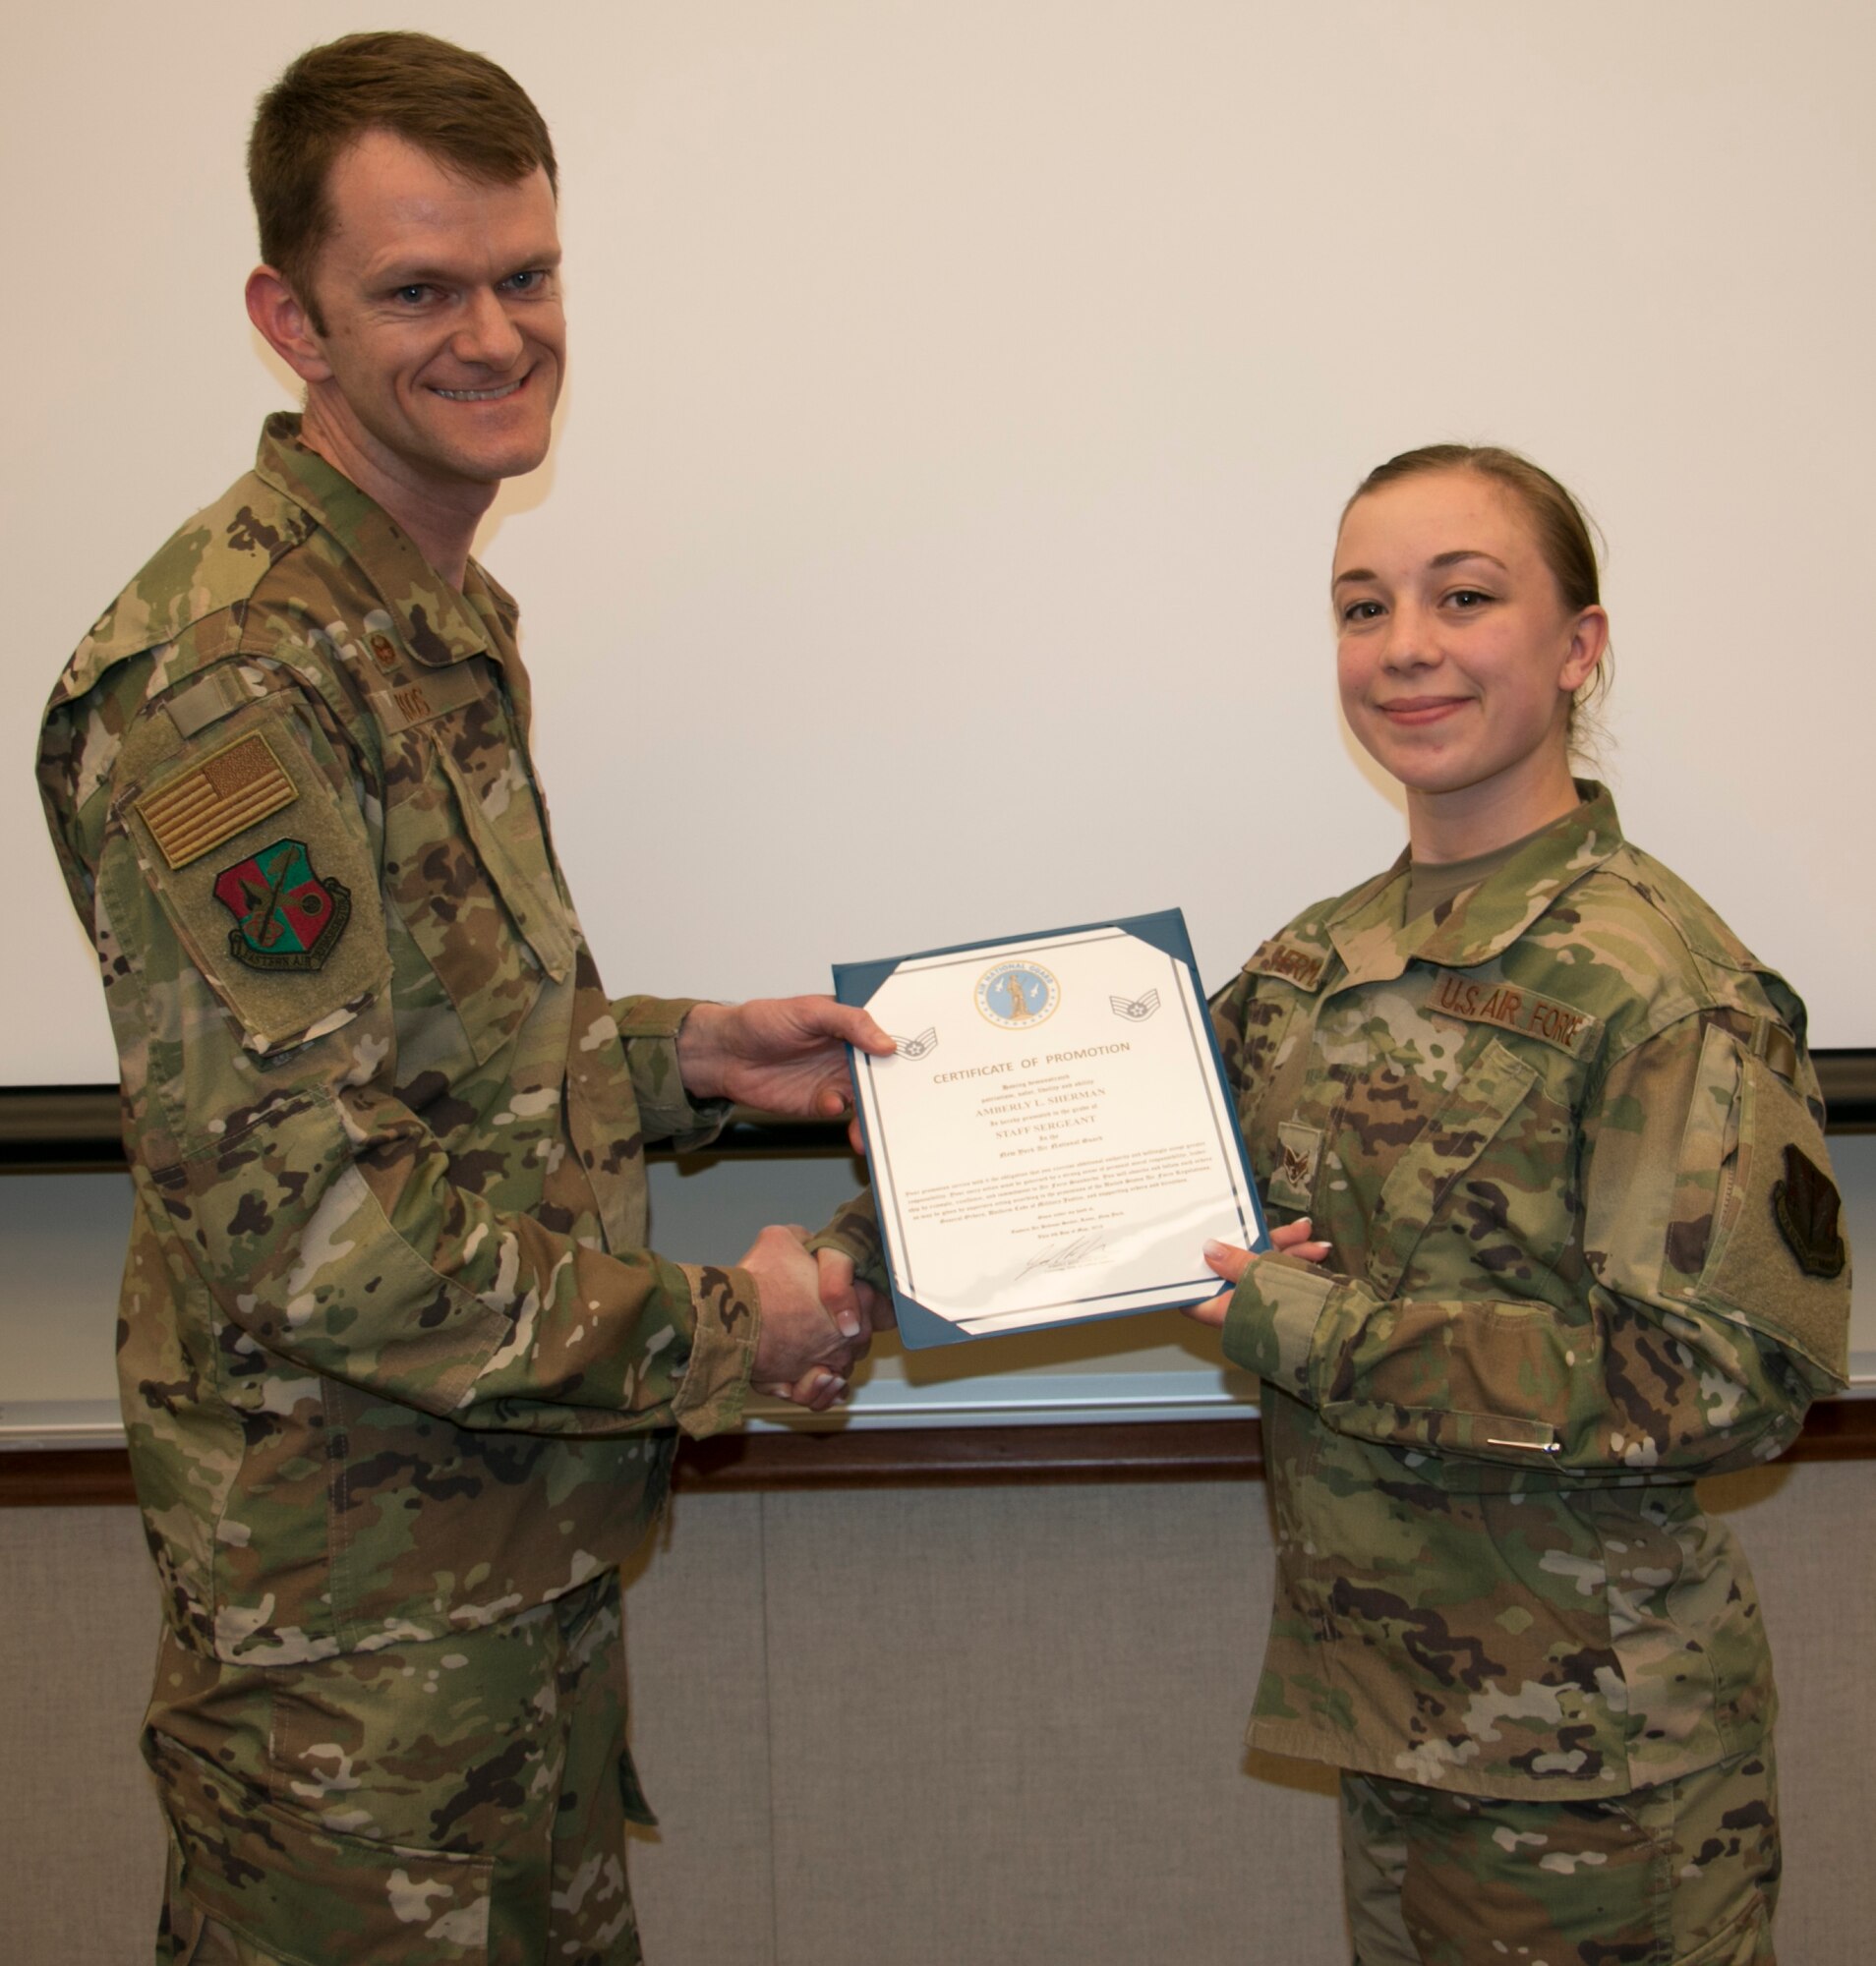 Sherman Promoted to Staff Sergeant